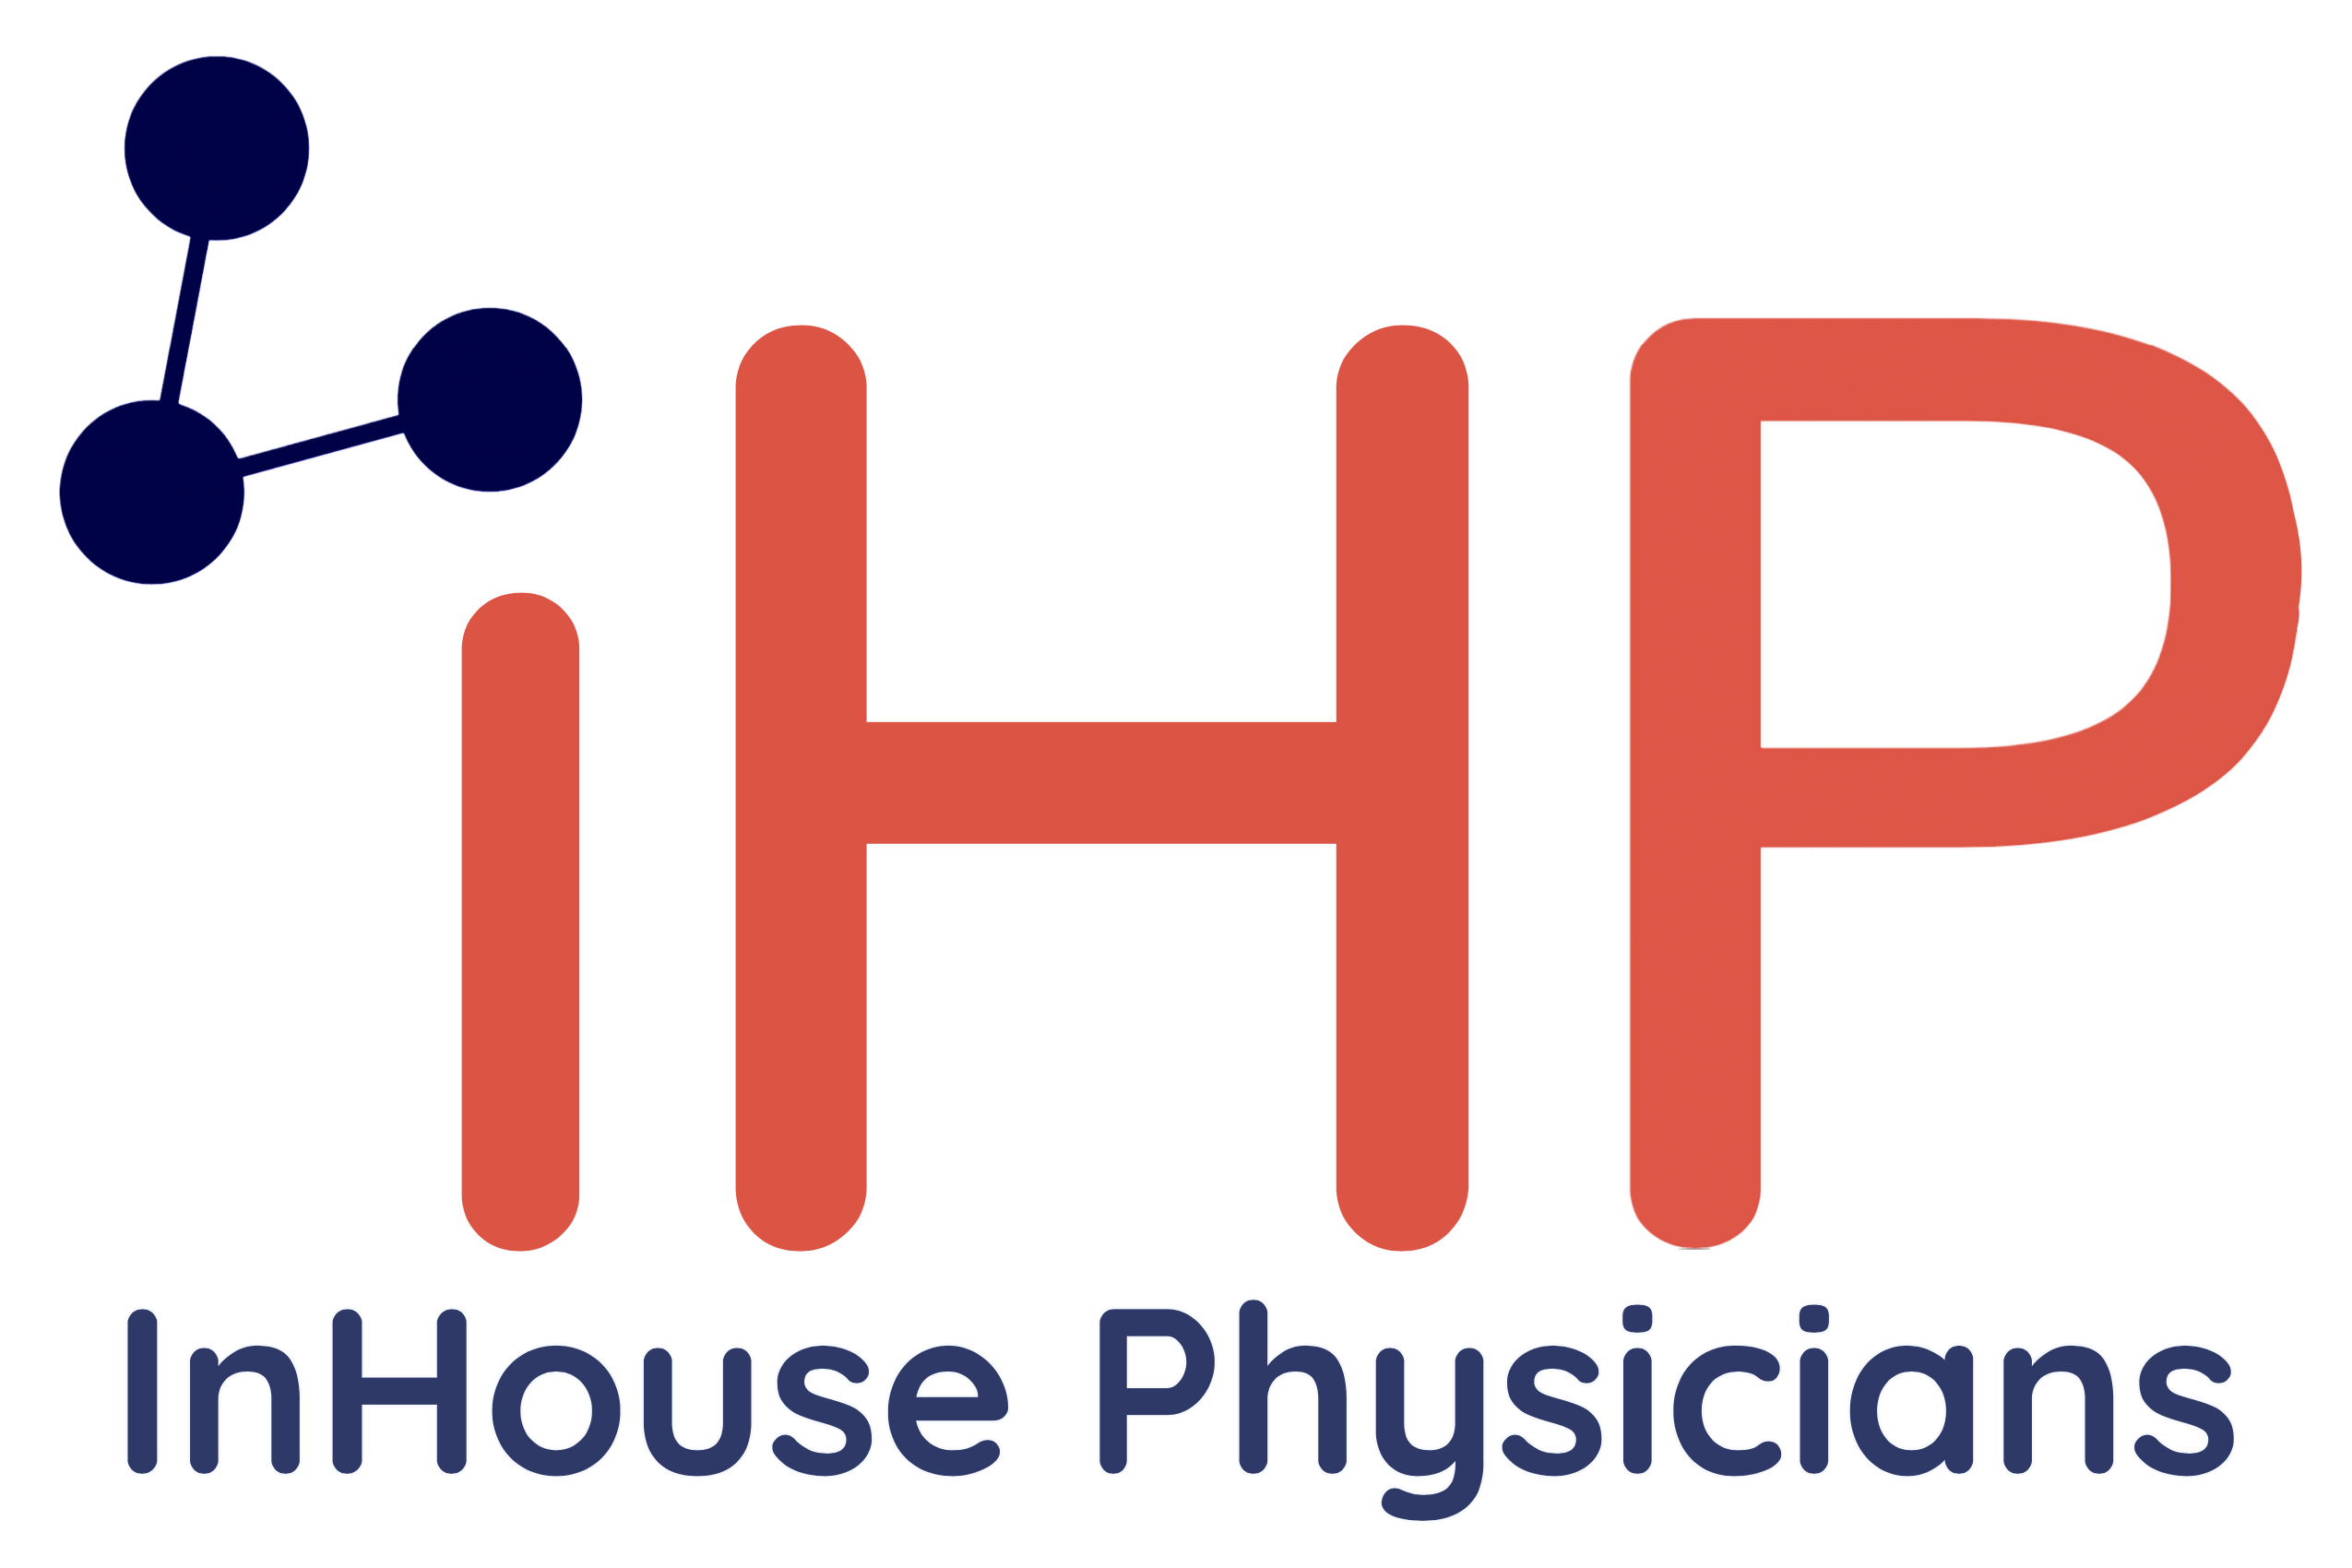 In-house physicians